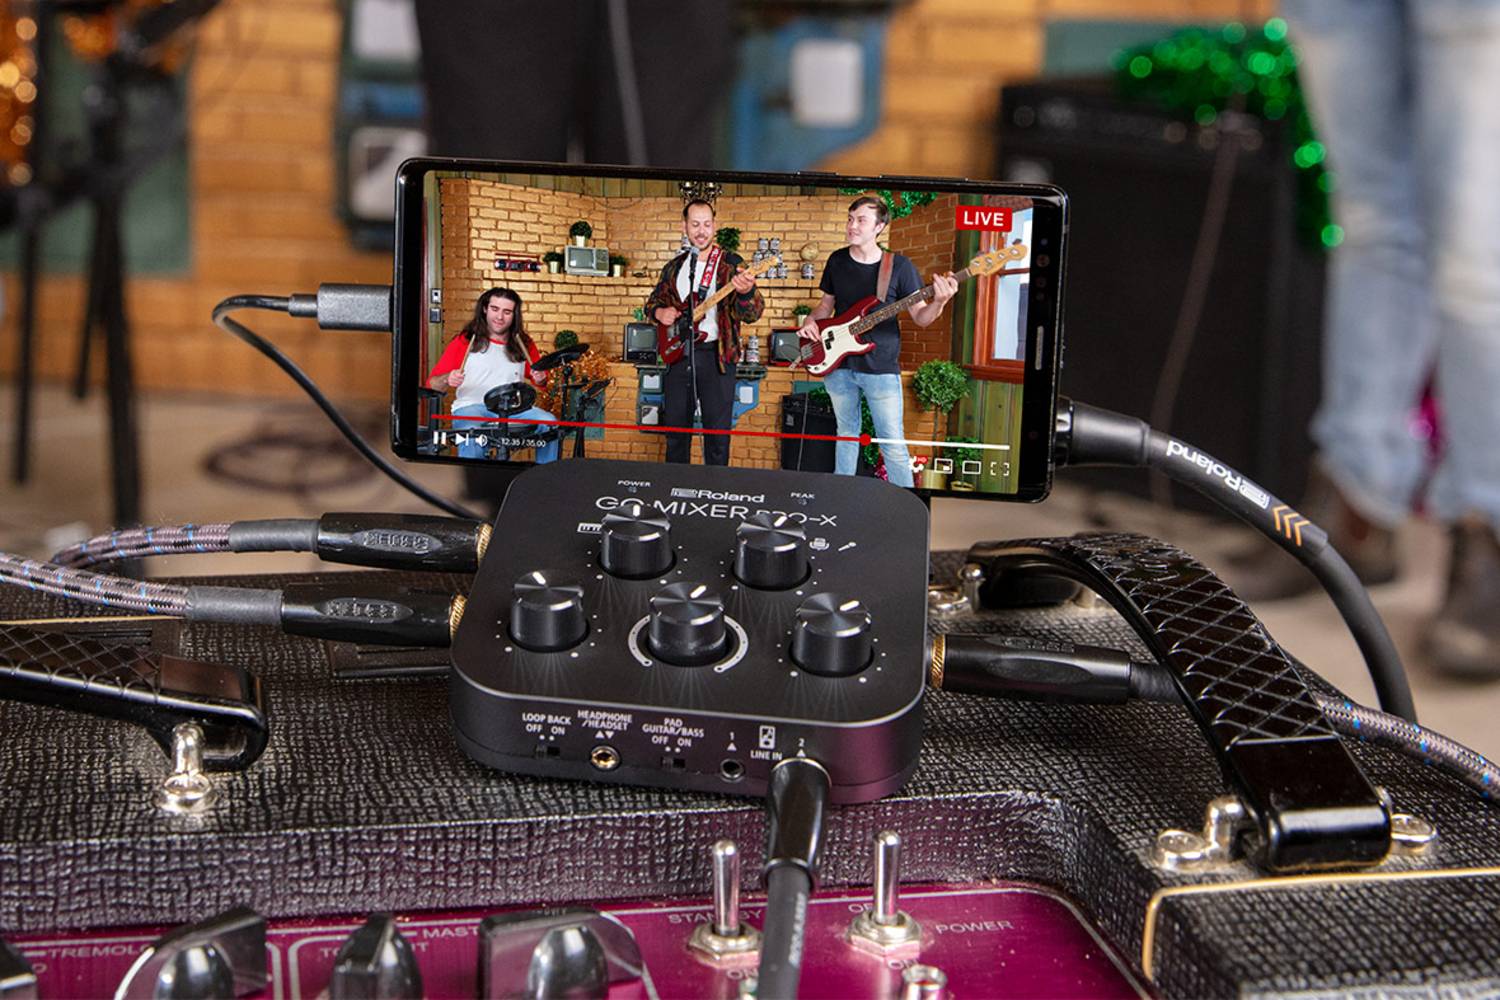 Roland's mobile GO:MIXER gets an upgrade with the PRO-X model